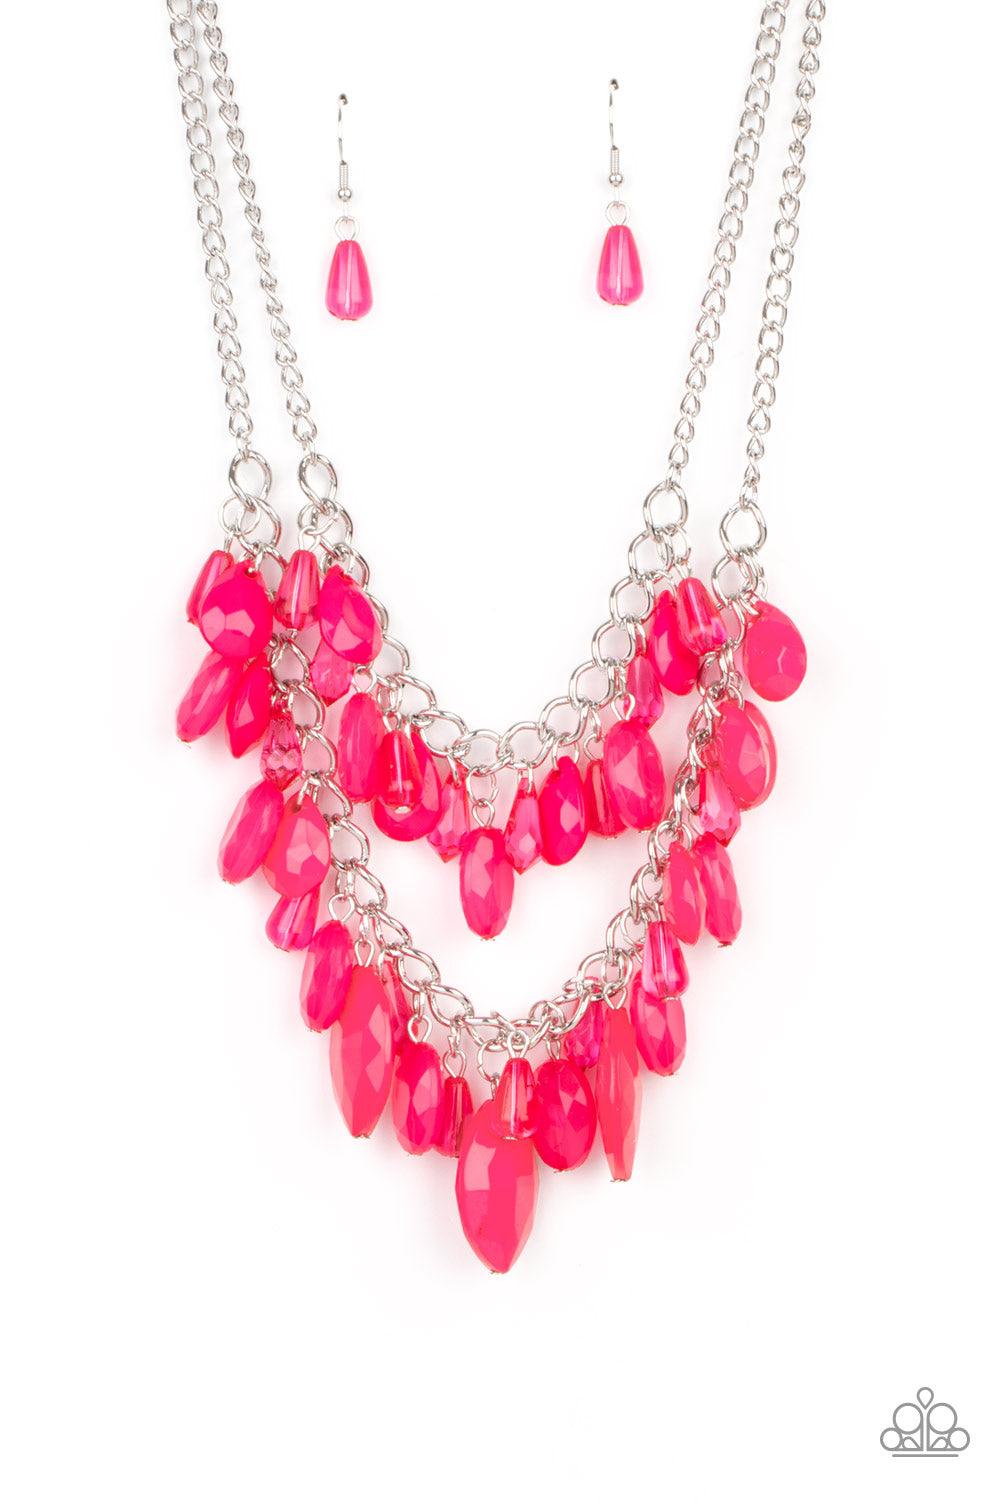 Paparazzi Accessories Midsummer Mixer - Pink Varying in opacity, a vivacious collection of pink oval and teardrop acrylic and crystal-like beads cascade from two bold silver chains below the collar for a flirtatiously layered look. Features an adjustable